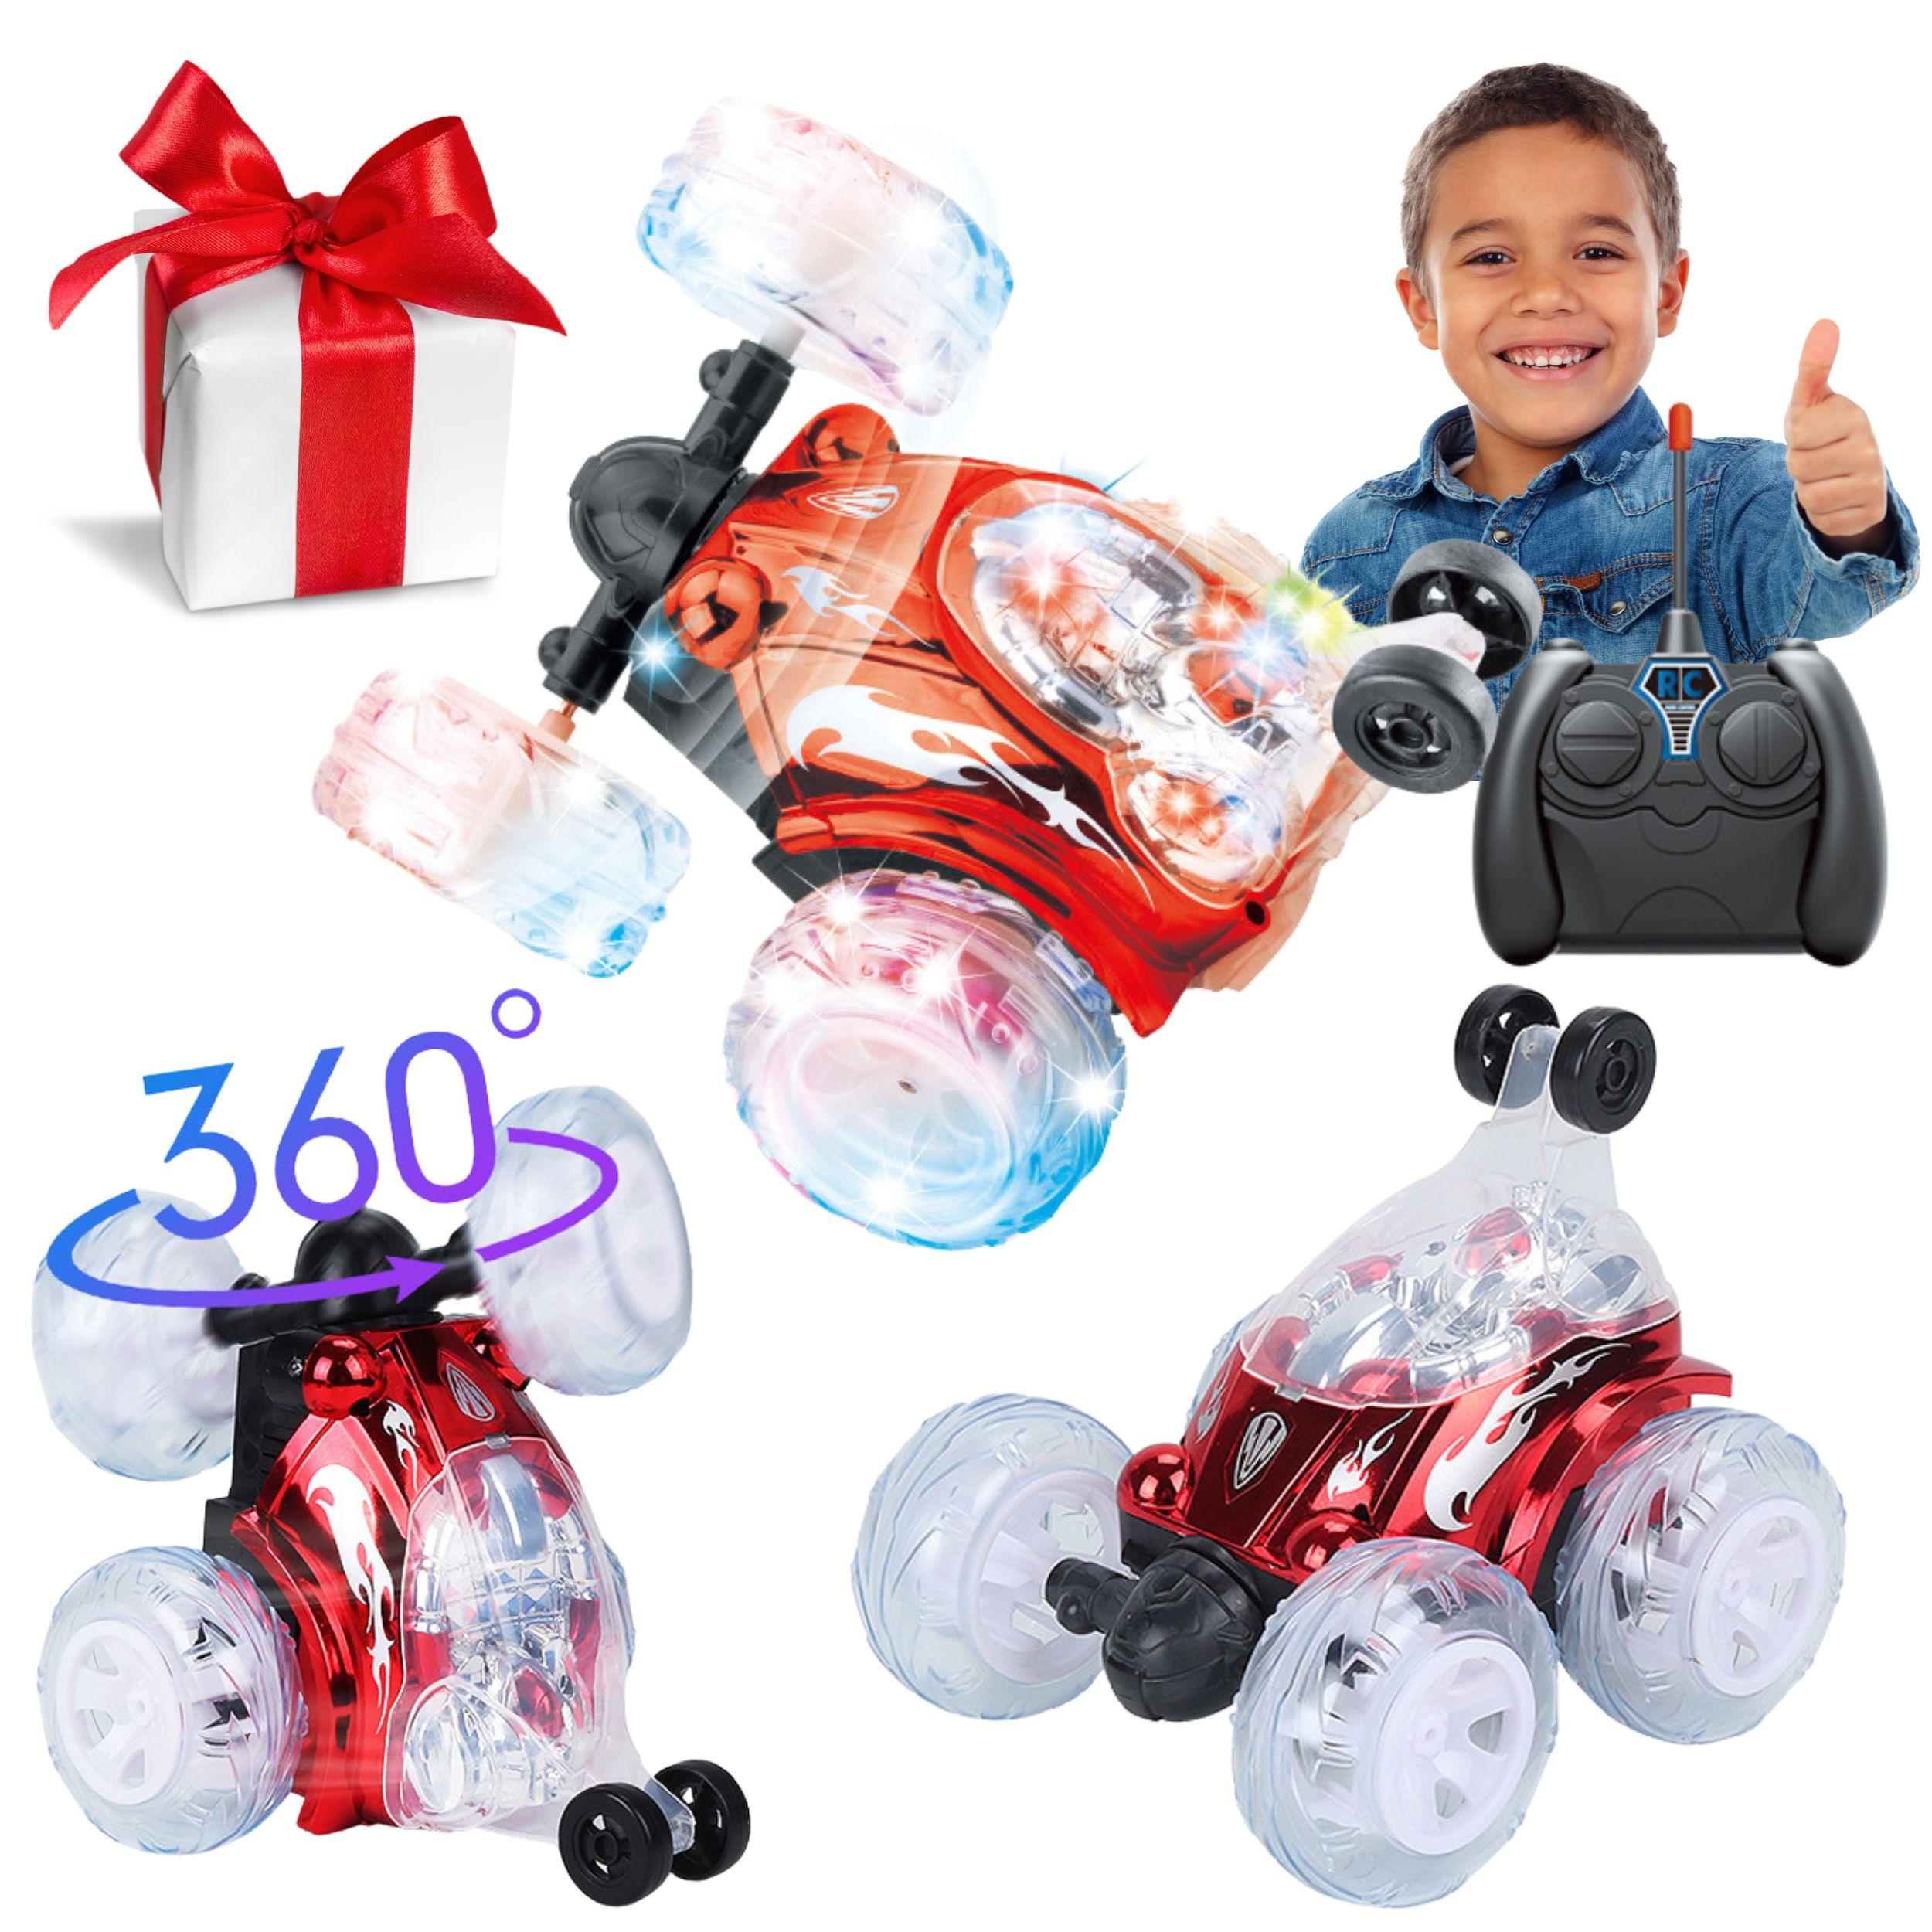 Remote-controlled car Kaskader - red